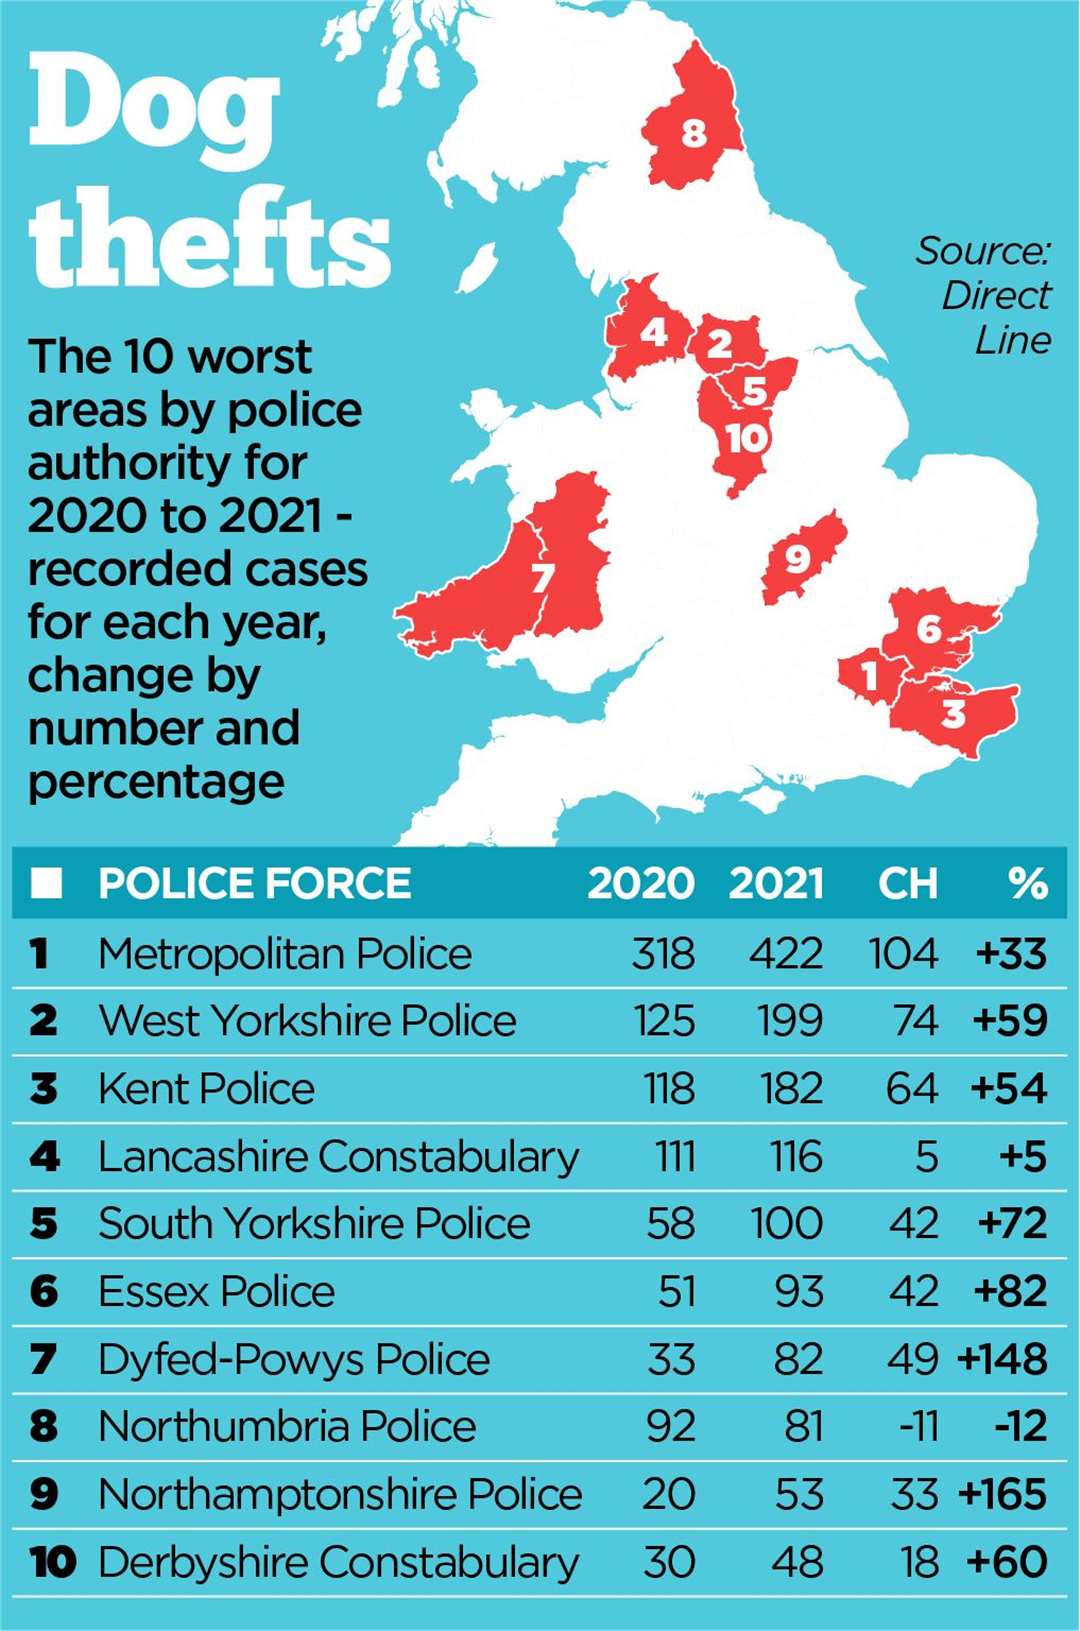 These are the police forces receiving the highest numbers of dog theft reports